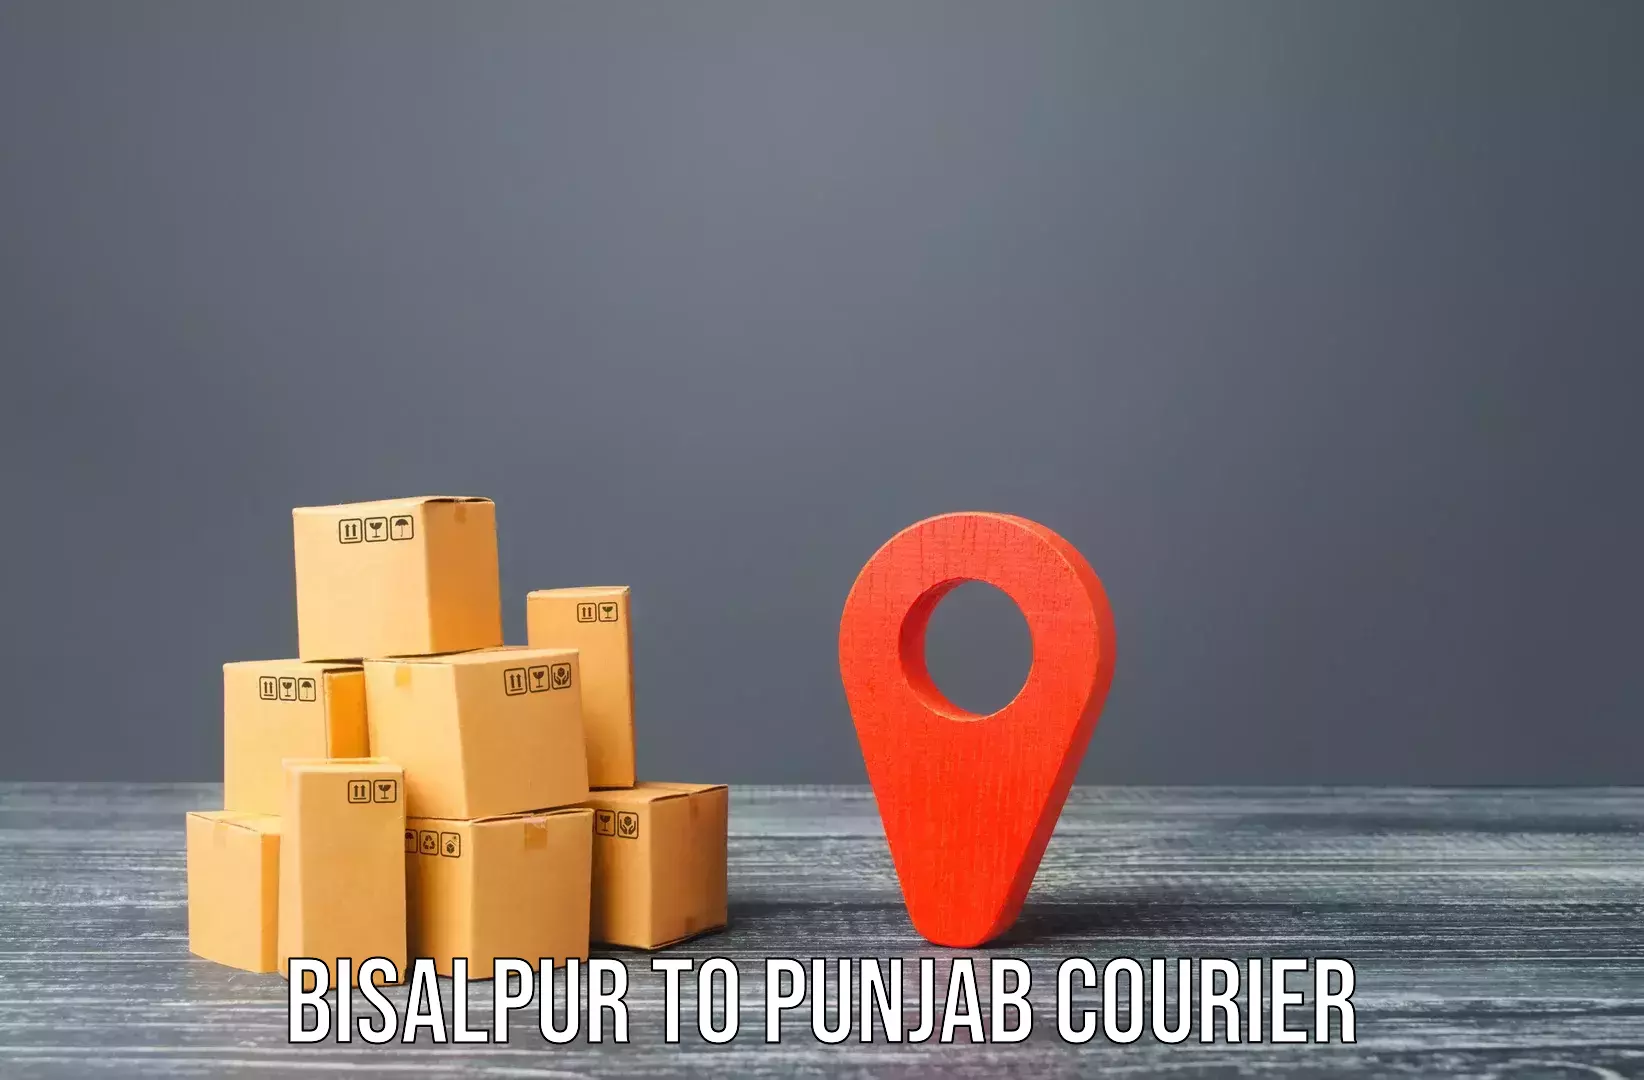 Home shifting experts Bisalpur to Sultanpur Lodhi